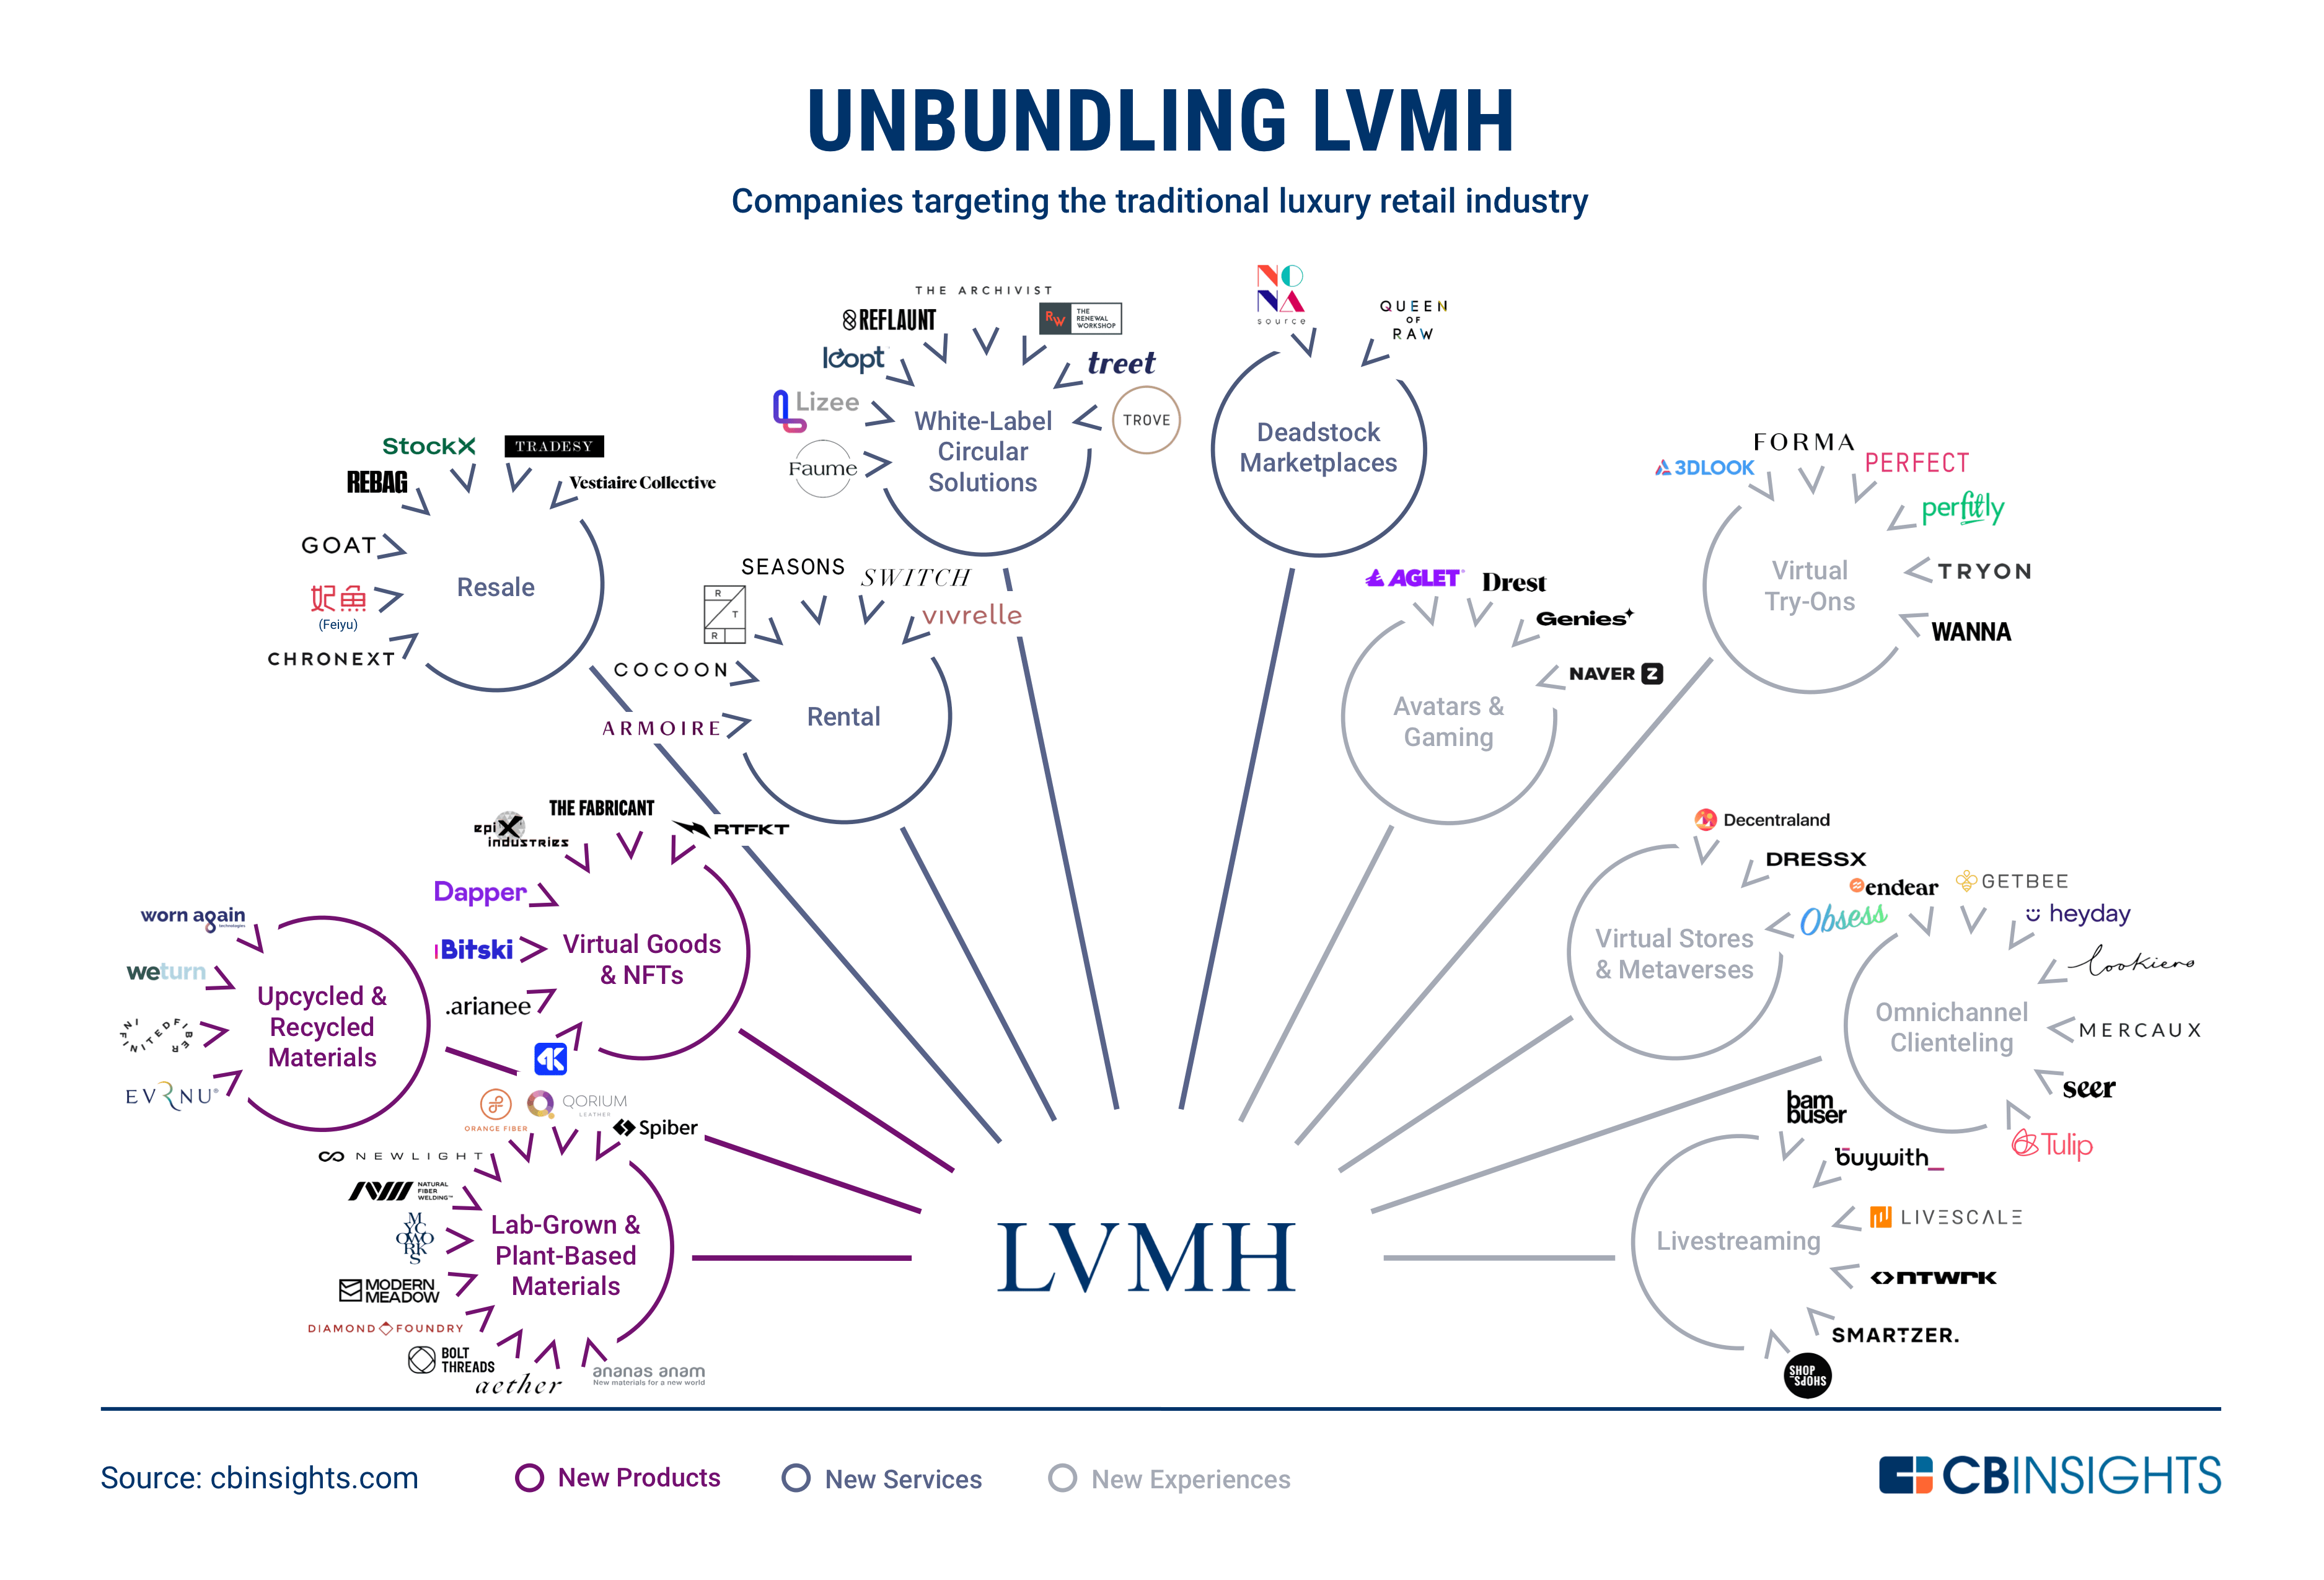 Unbundling LVMH: How Traditional Luxury Retail Is Being Disrupted